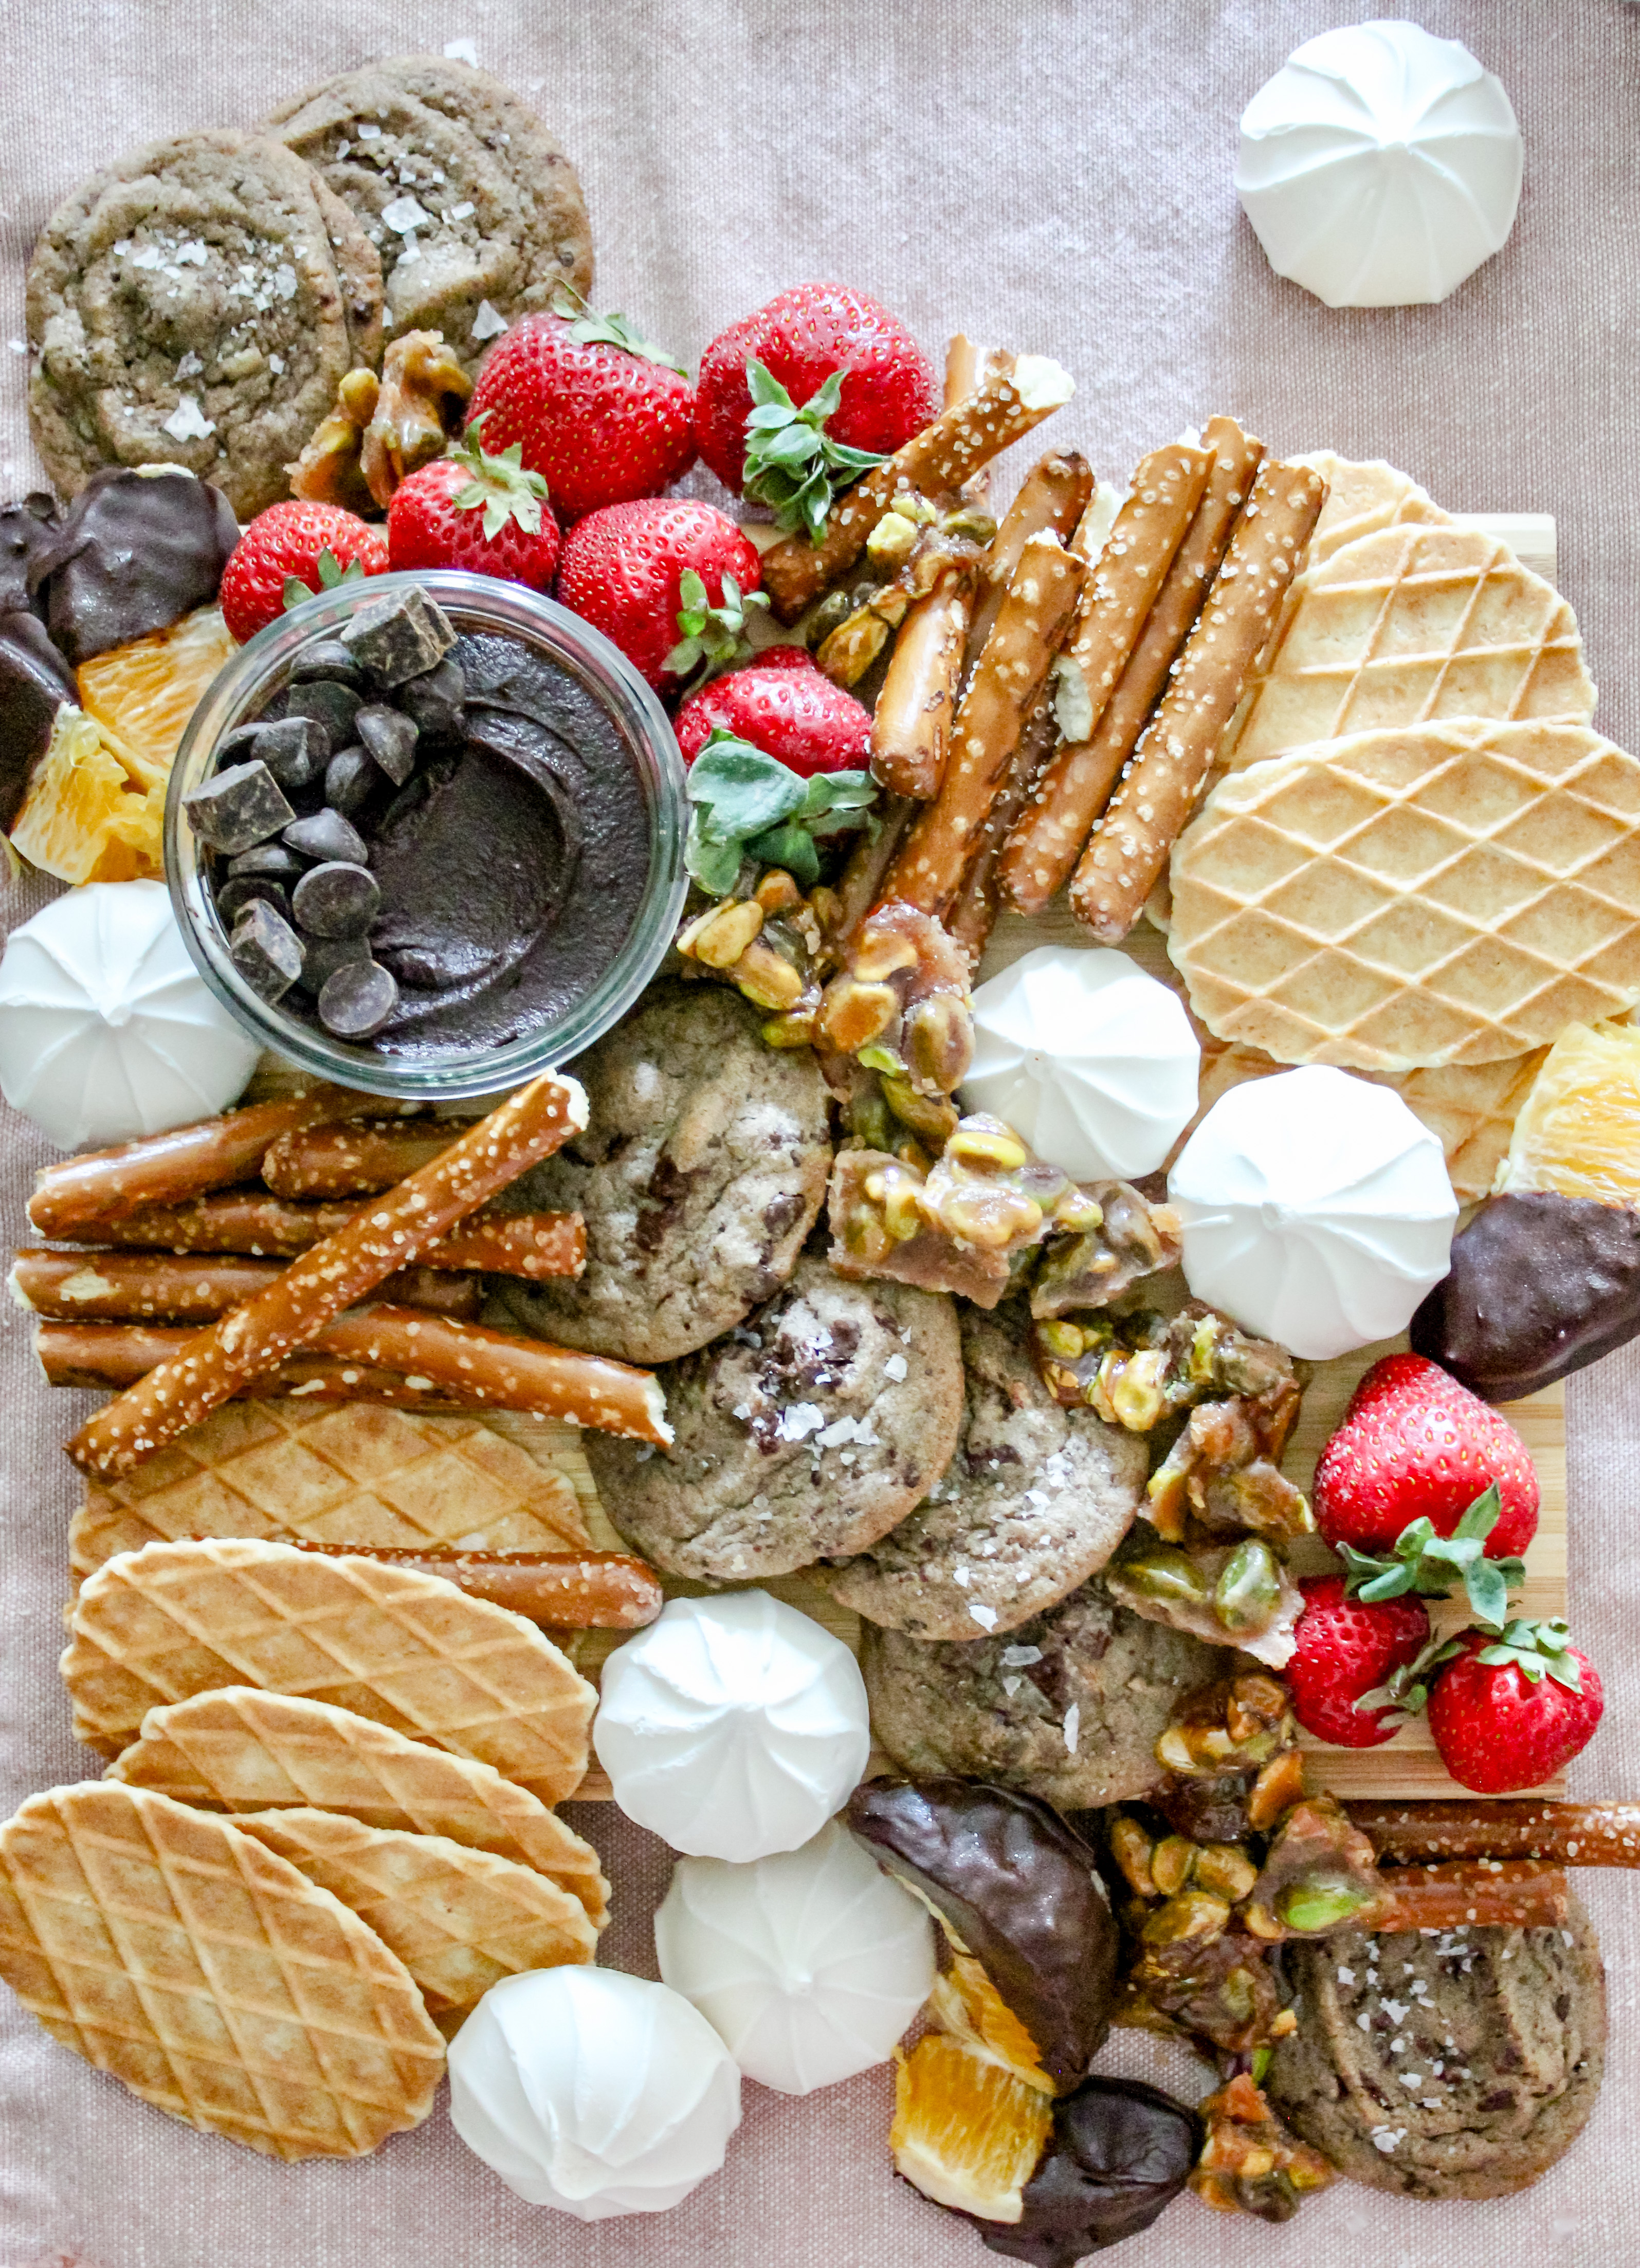 The Dessert Charcuterie Board That's Irresistibly Delicious